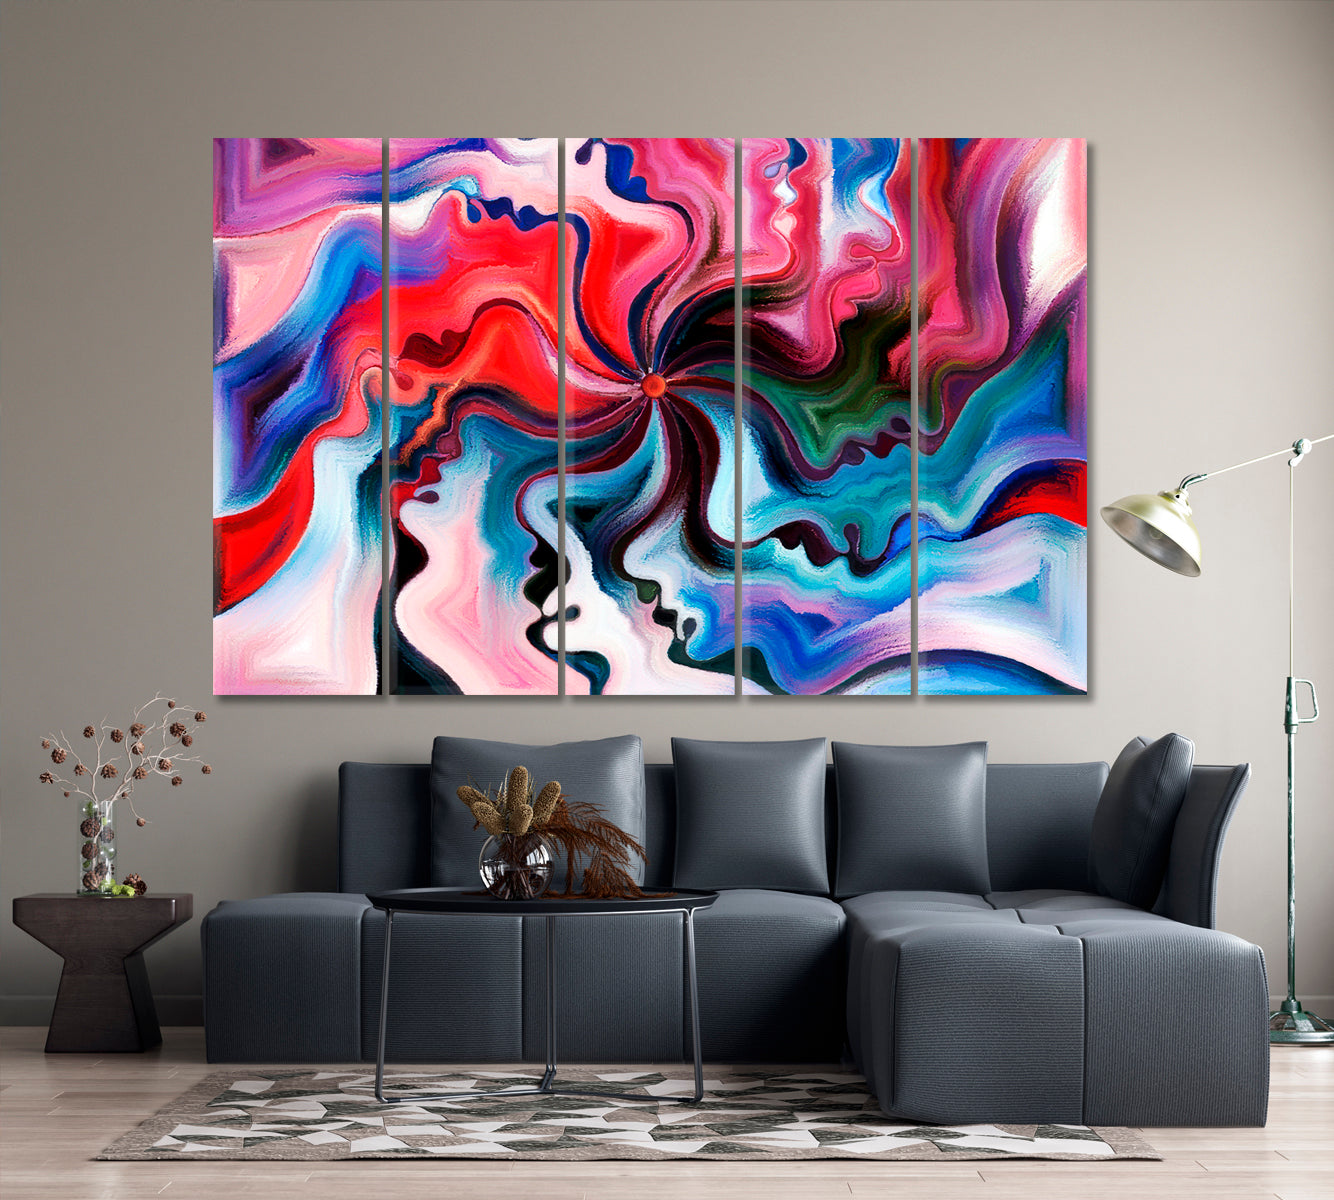 Spectral Love Abstract Design Abstract Art Print Artesty 5 panels 36" x 24" 